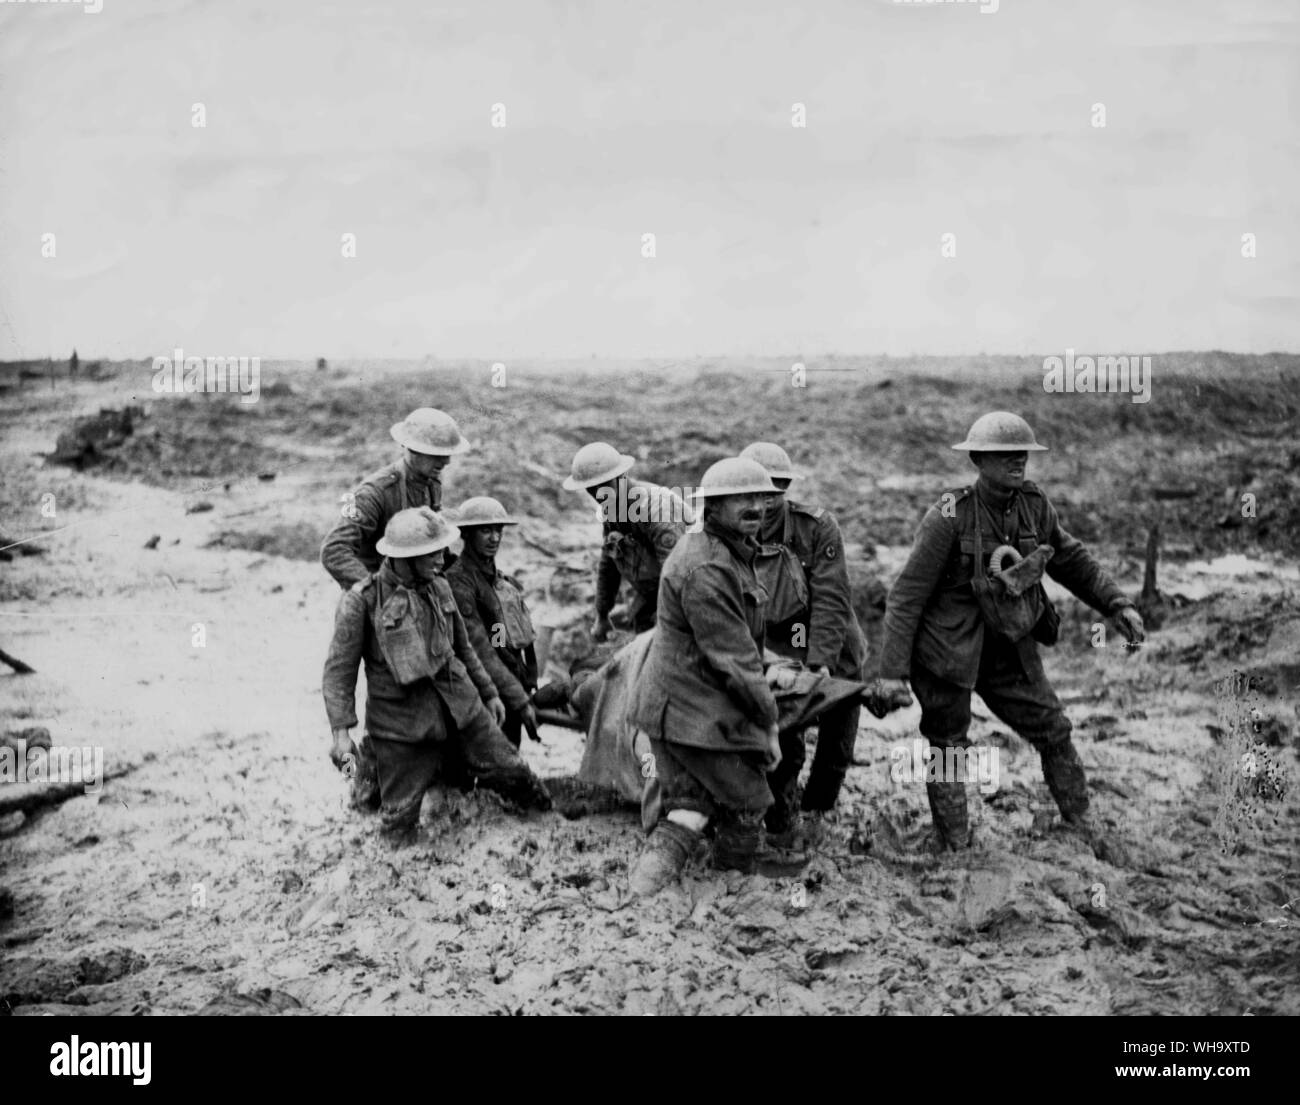 WW1: The common enemy on the Western Front was mud. These stretcher bearers are bringing in a wounded soldier. The mud sometimes reaches their knees. Stock Photo